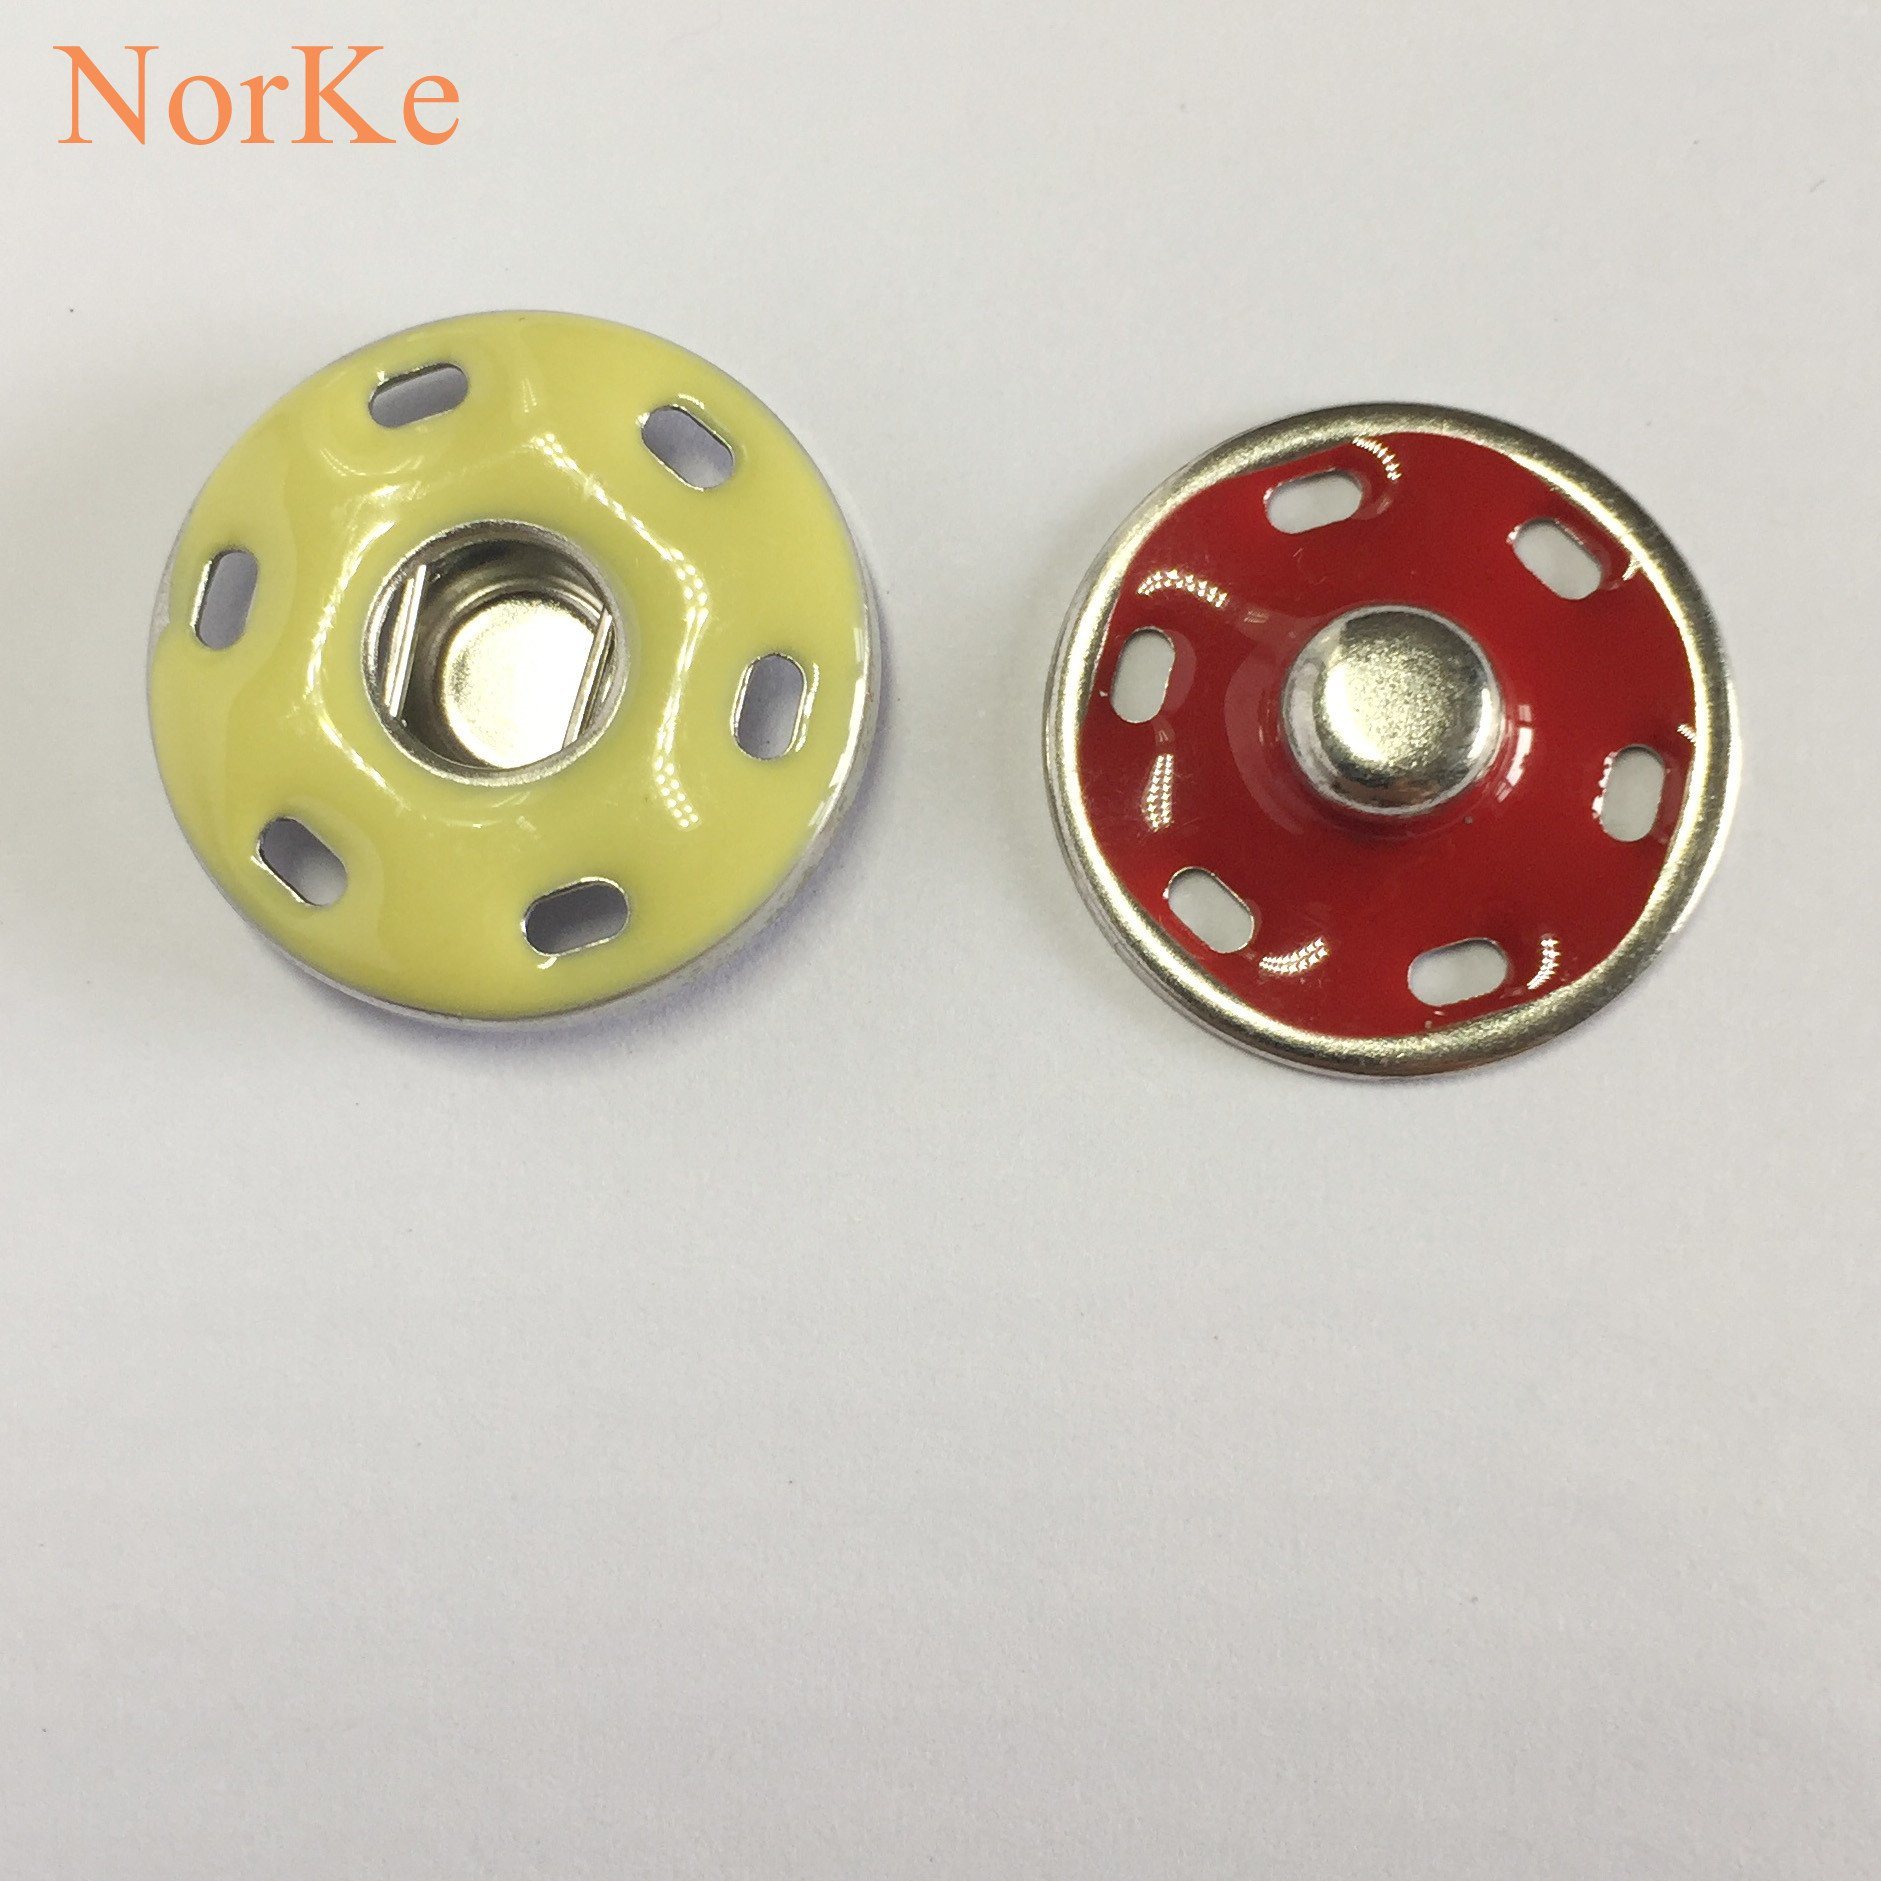 Sewing Metal Press Snap Button with Epoxy Covered